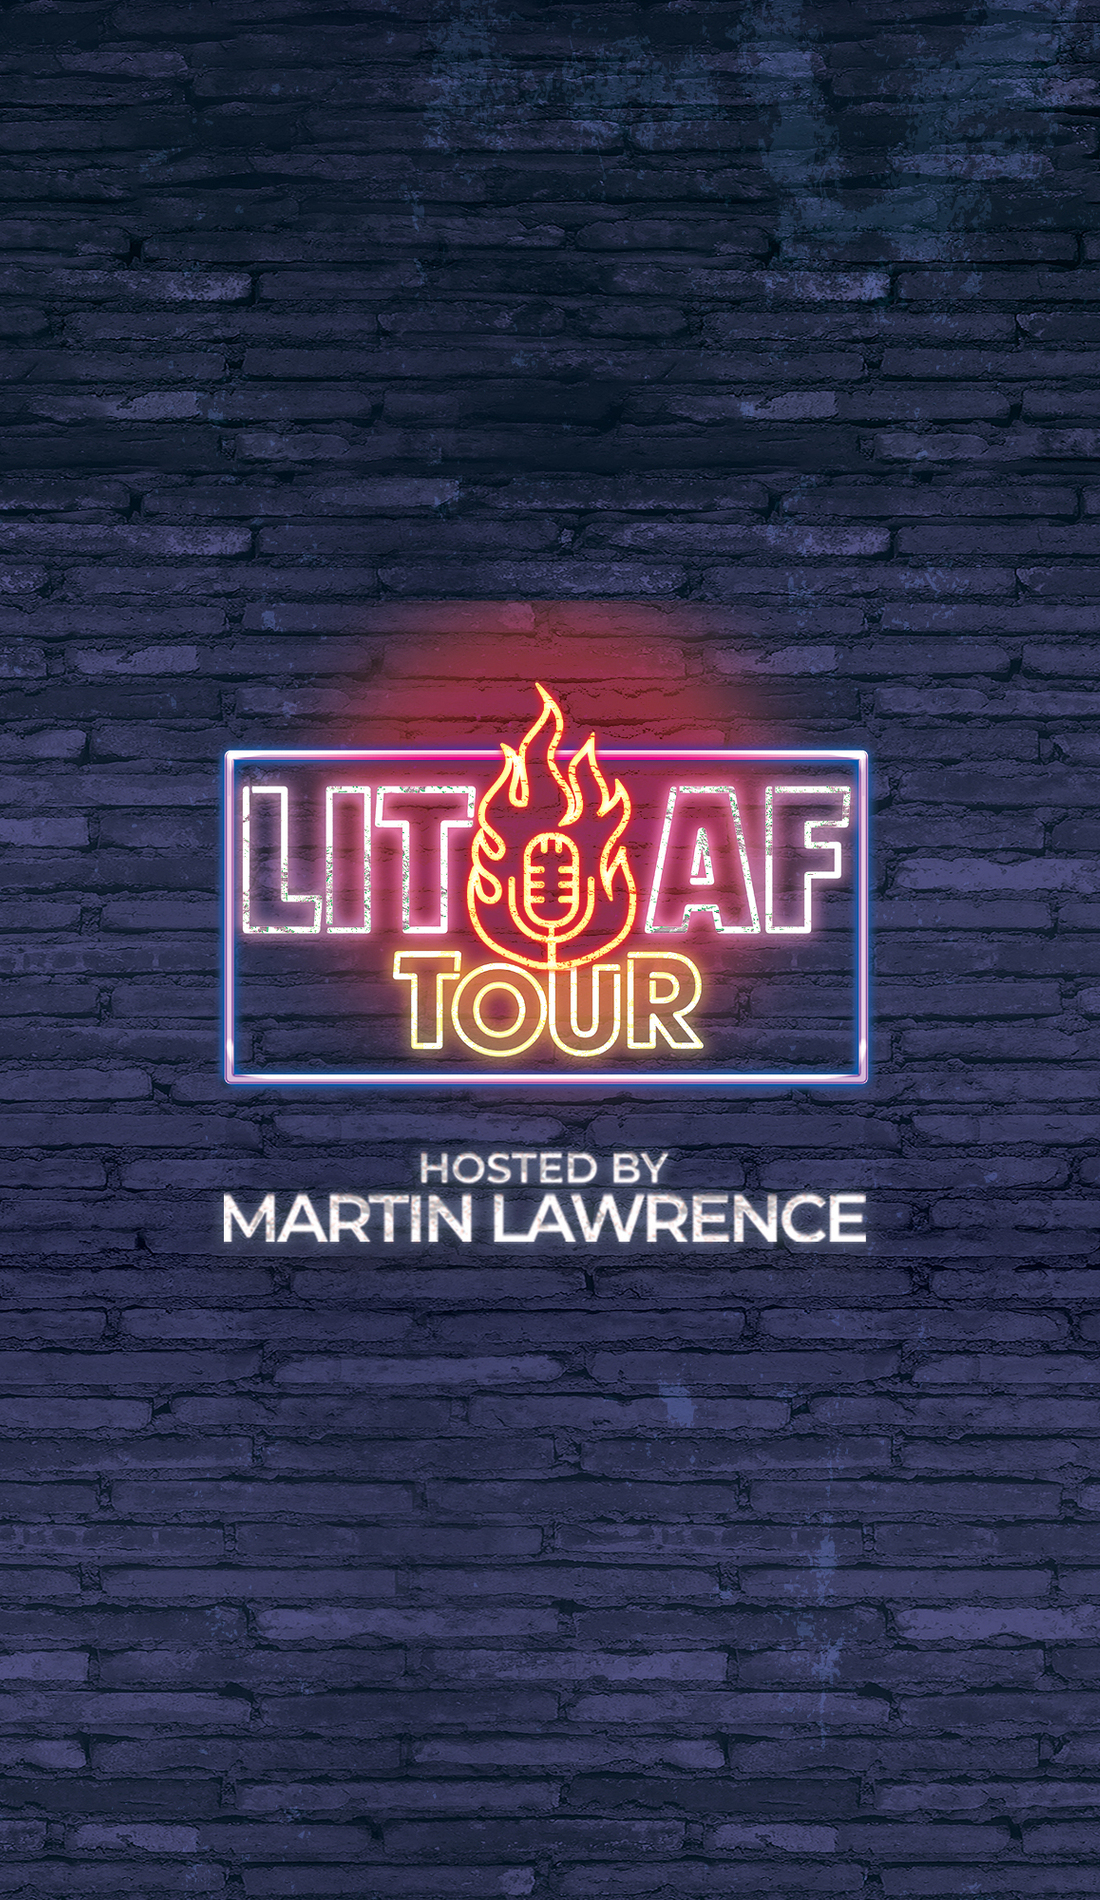 A Martin Lawrence live event